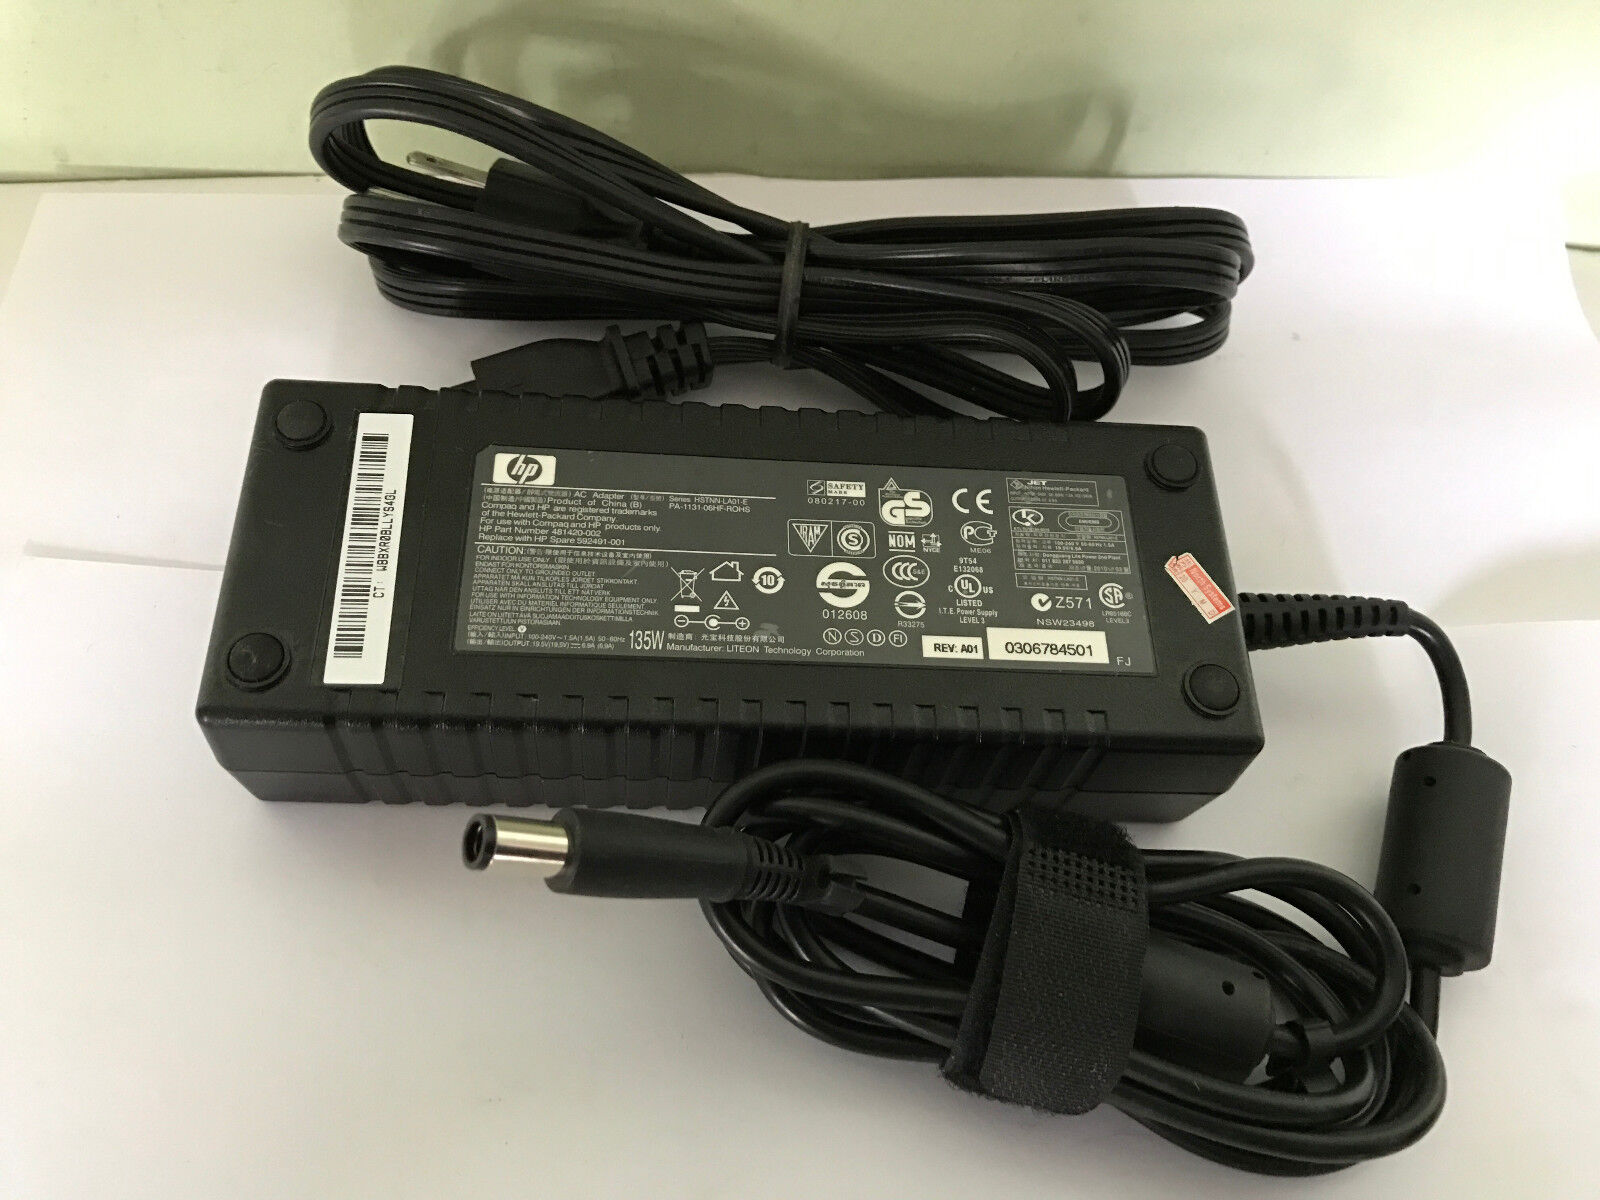 HP HDX HDX18 HDX18t  smart 18.5V 6.5A 135W Power Supply Charger+power CORD